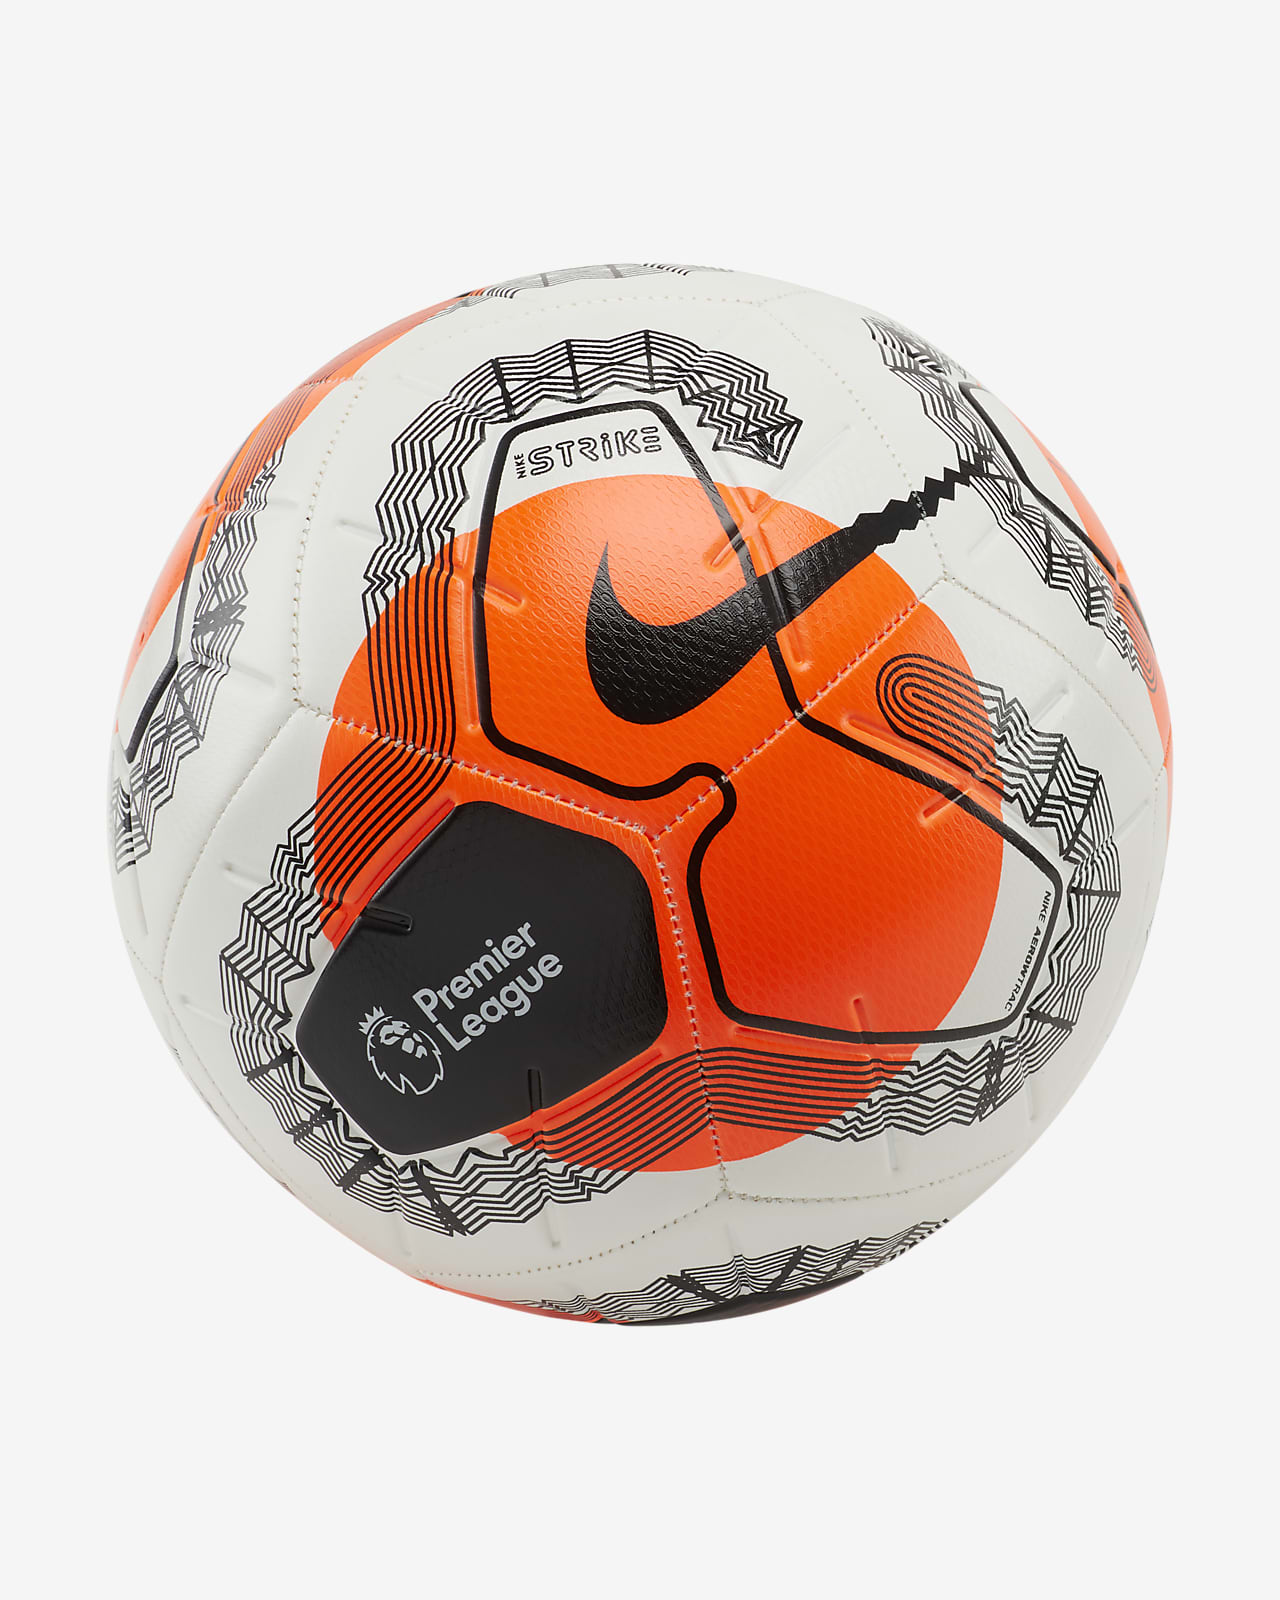 nike aerowtrac soccer ball review